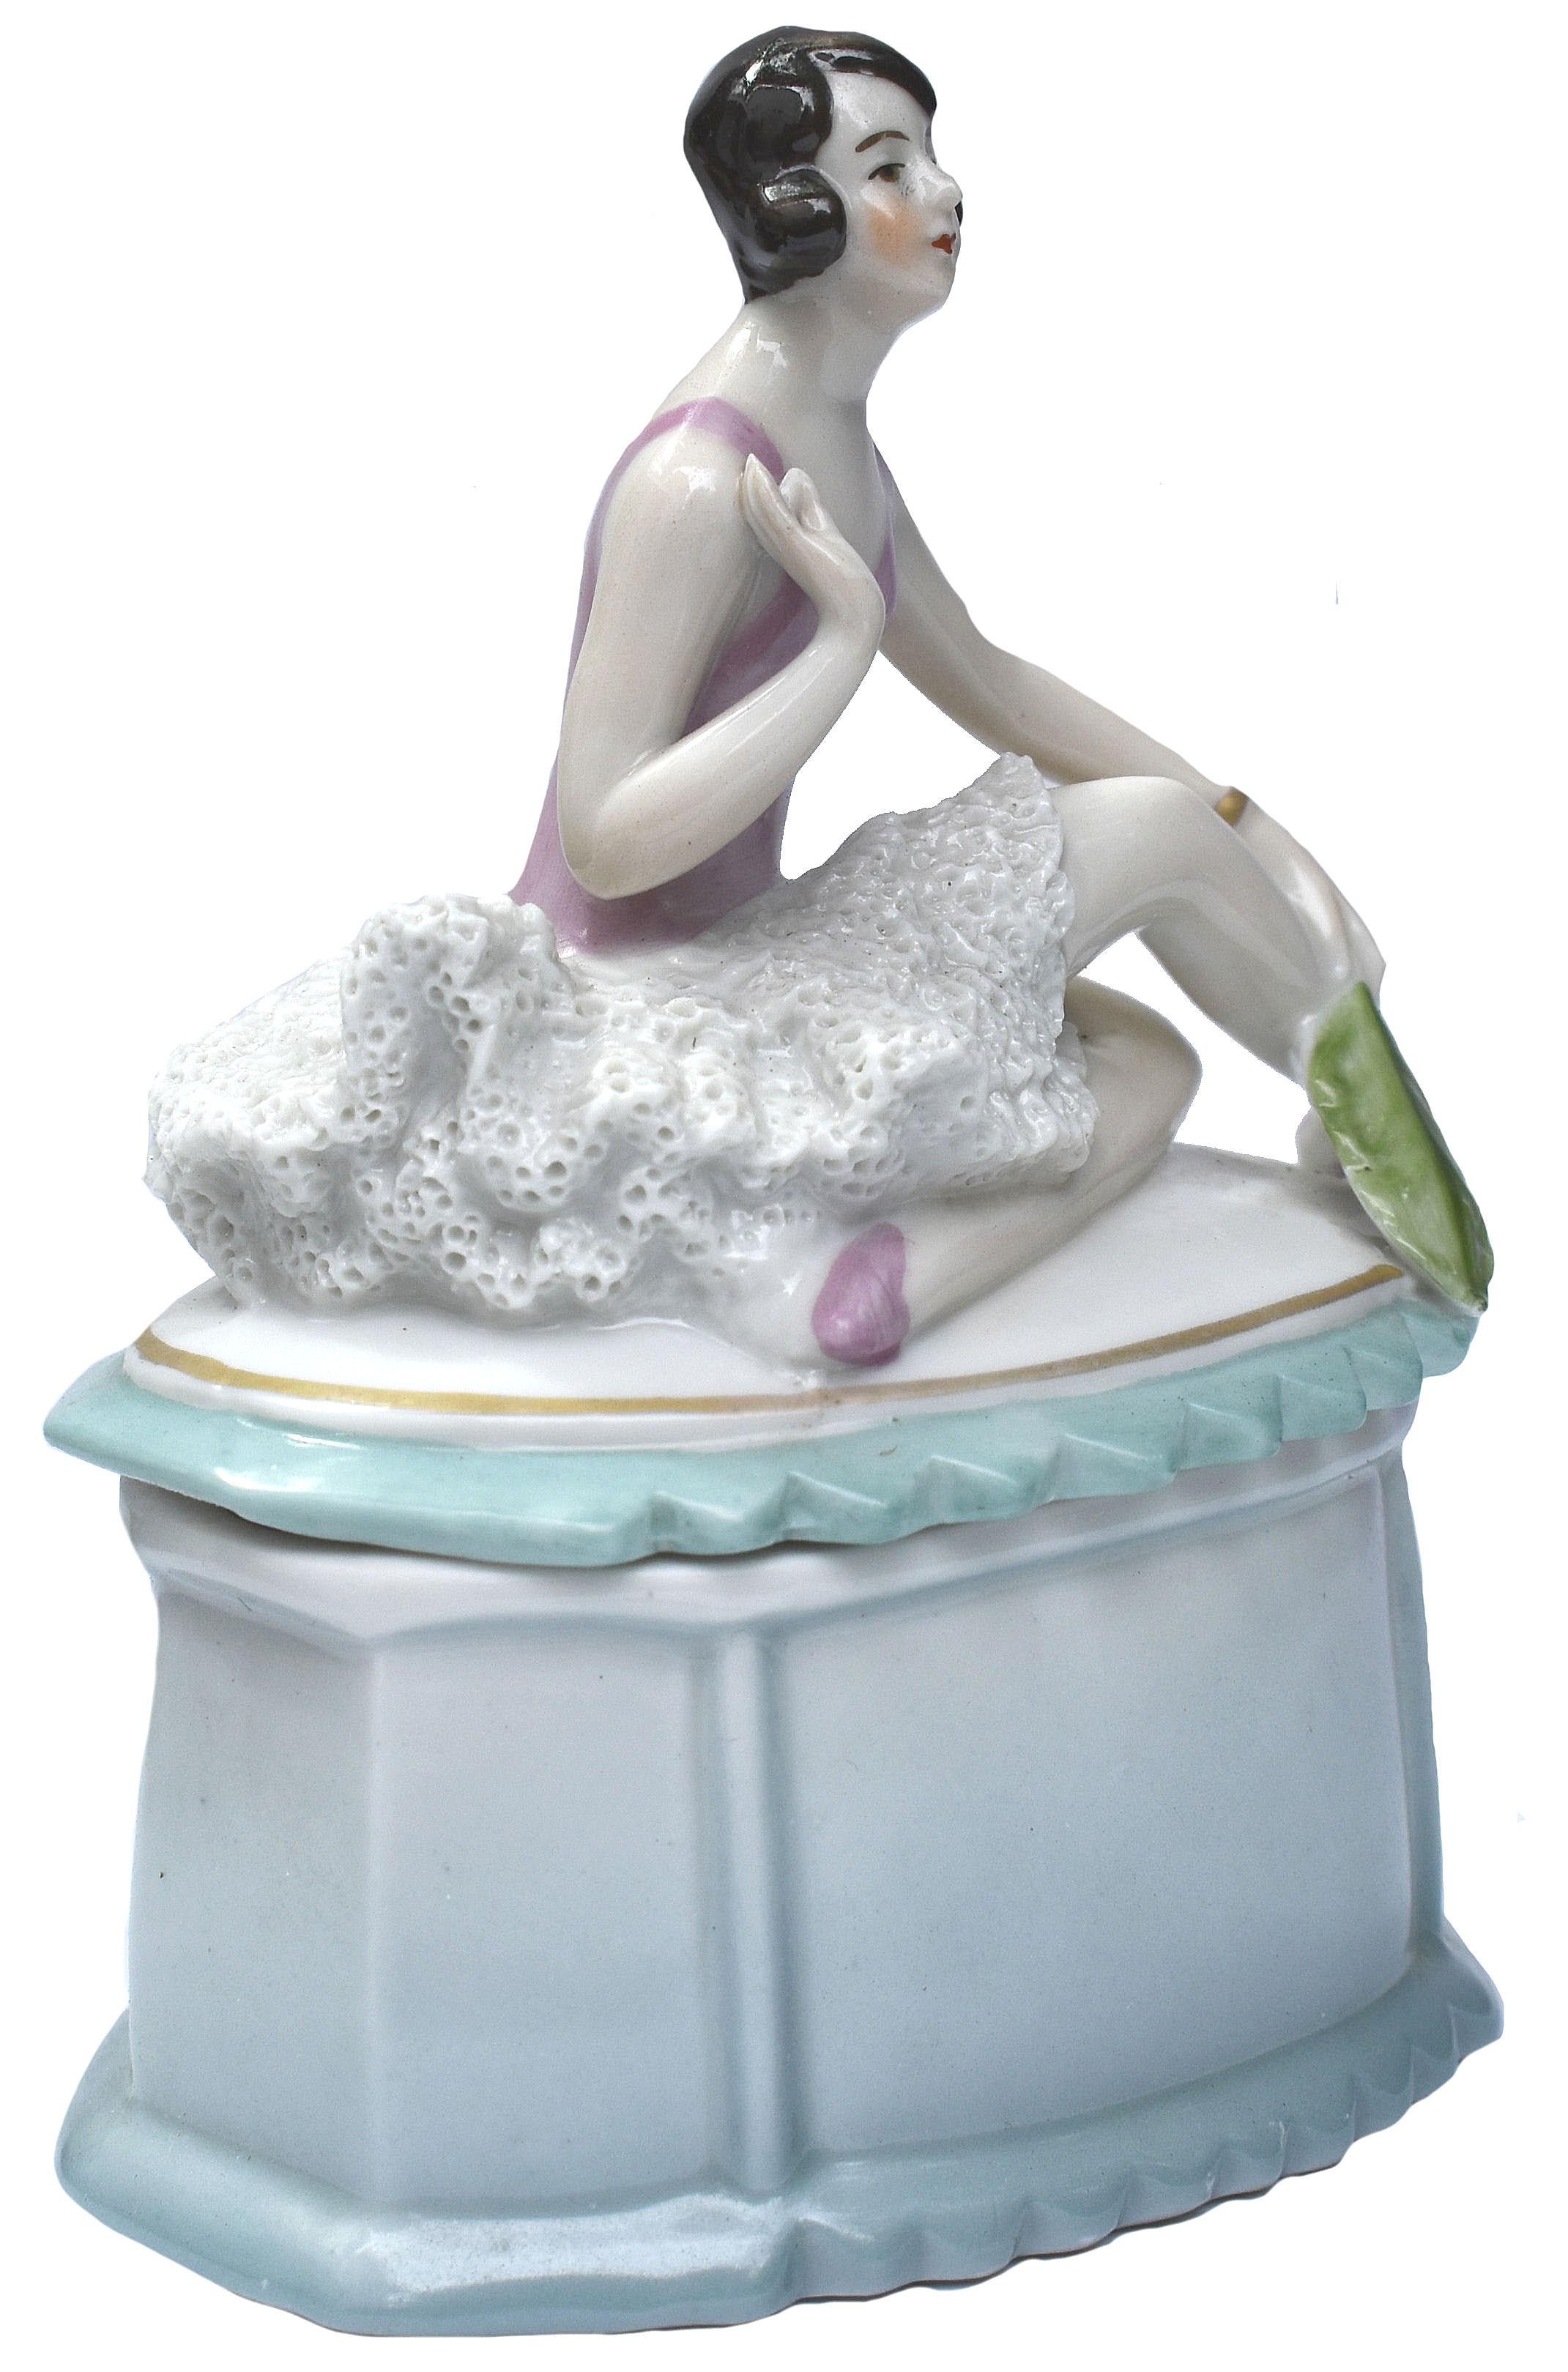 Striking and quite rare is this 1930s Art Deco ceramic powder box which depicts a stylized female dancer sat on the lid of a porcelain box. Beautiful colouring and detailing. A rare design and highly sought after. She's in great condition with no